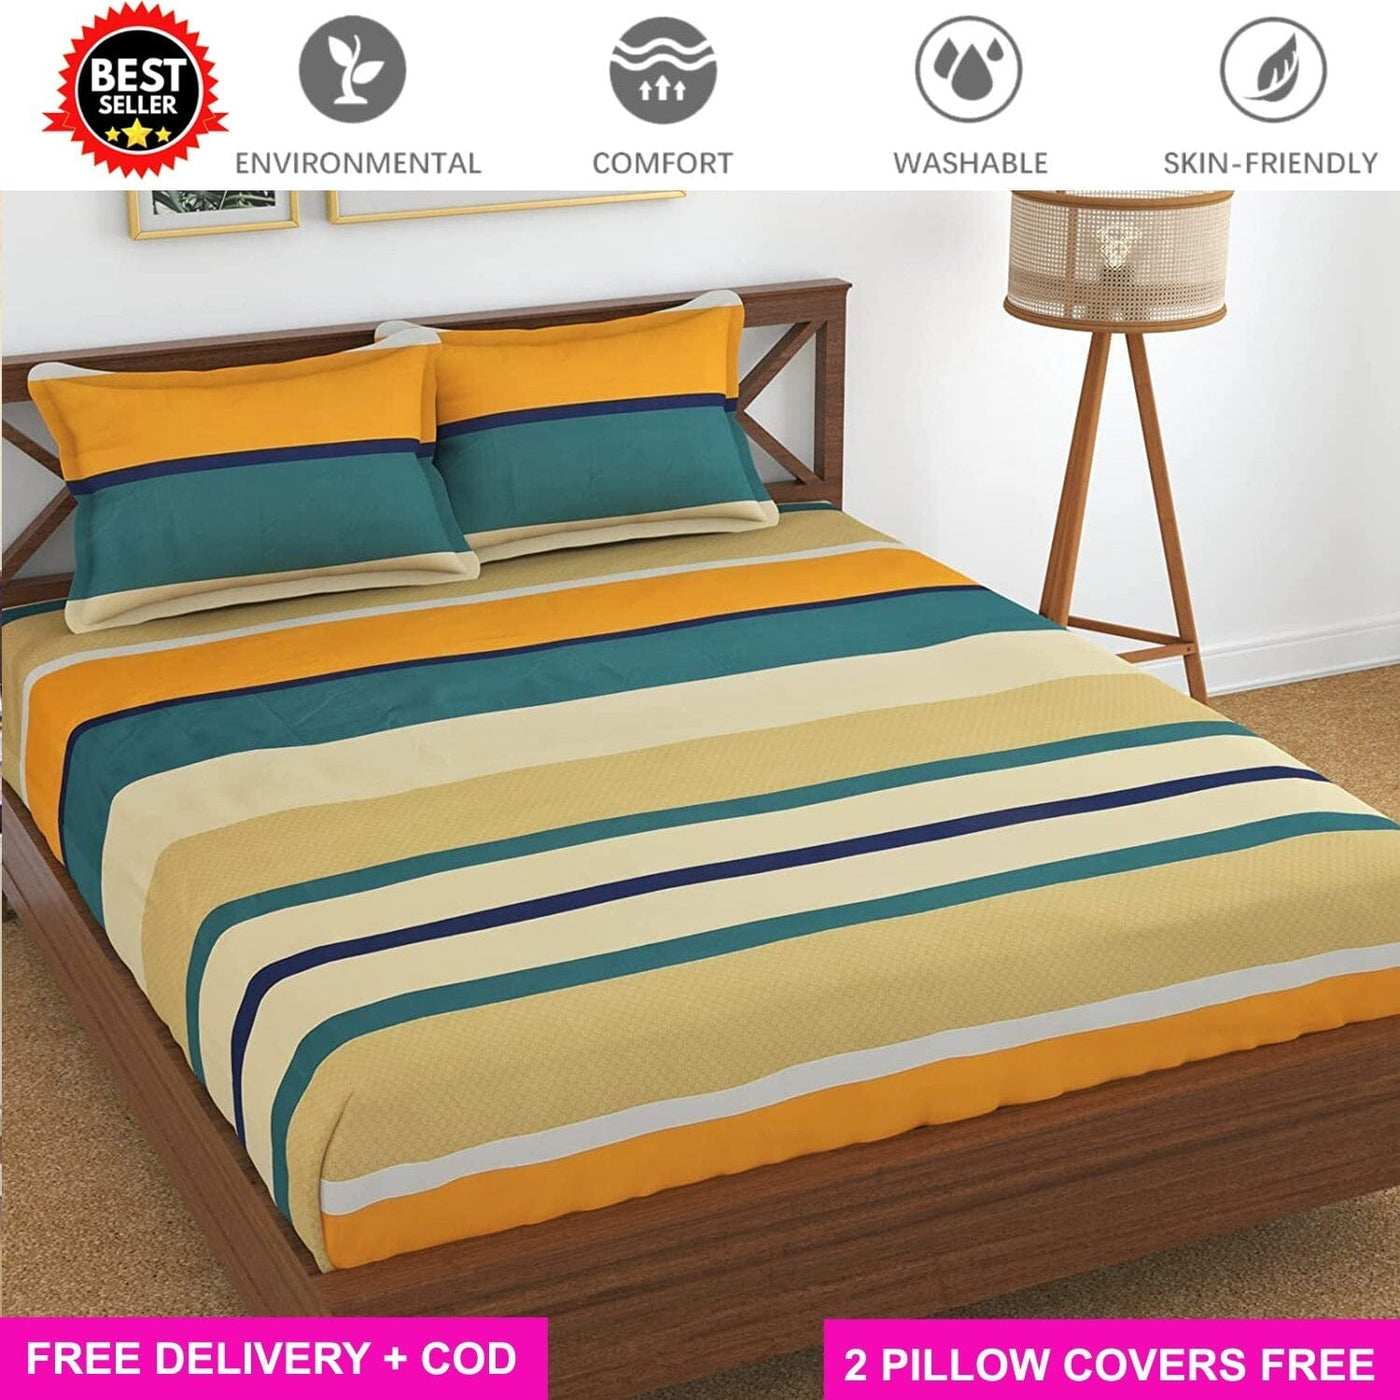 Light Brown Full Elastic Fitted Bedsheet with 2 Pillow Covers Great Happy IN KING SIZE - ₹1199 